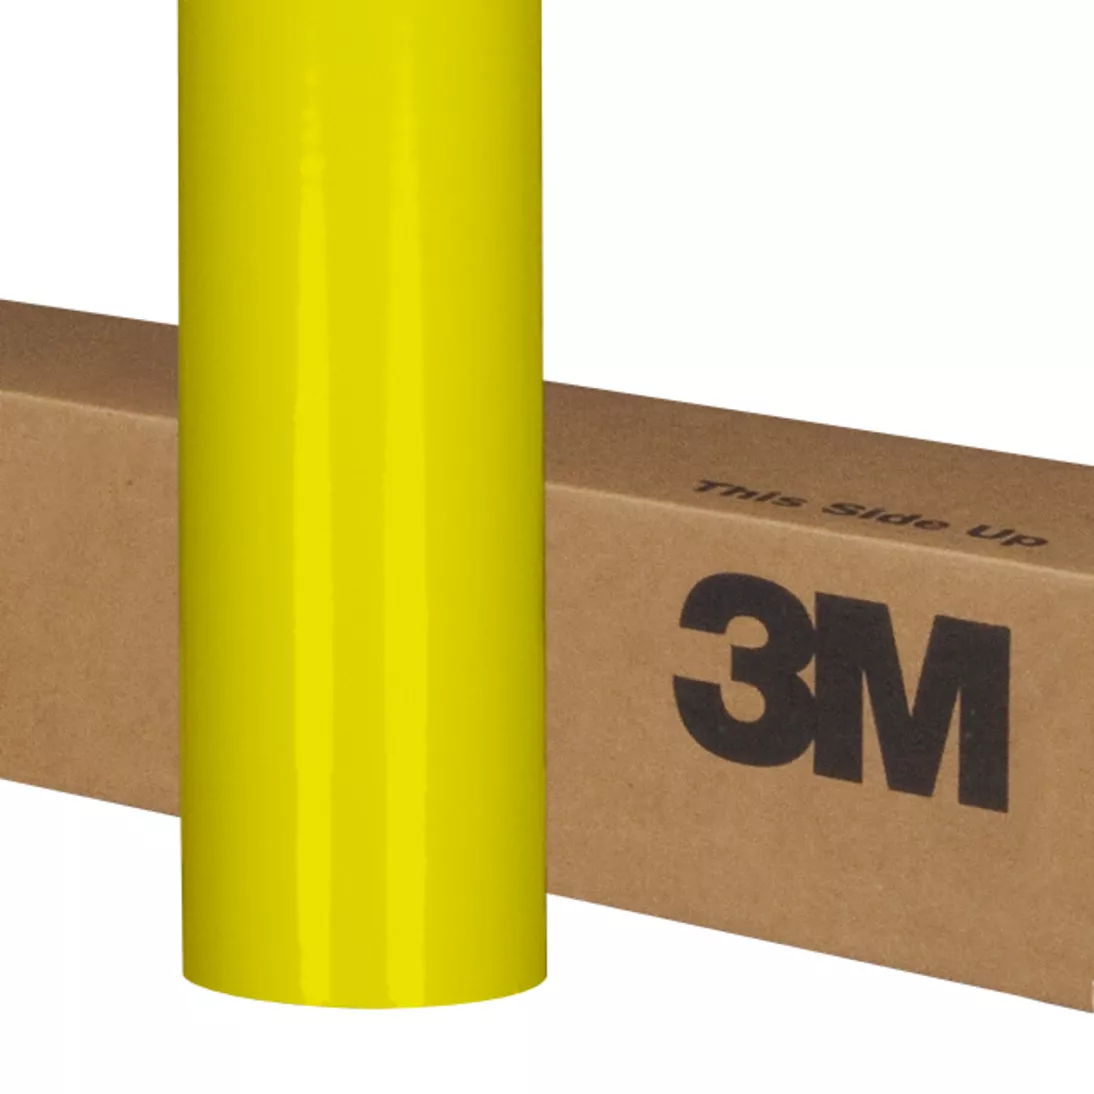 3M™ Scotchcal™ Translucent Graphic Film 3630-4147, Yellow, 48 in x 50 yd